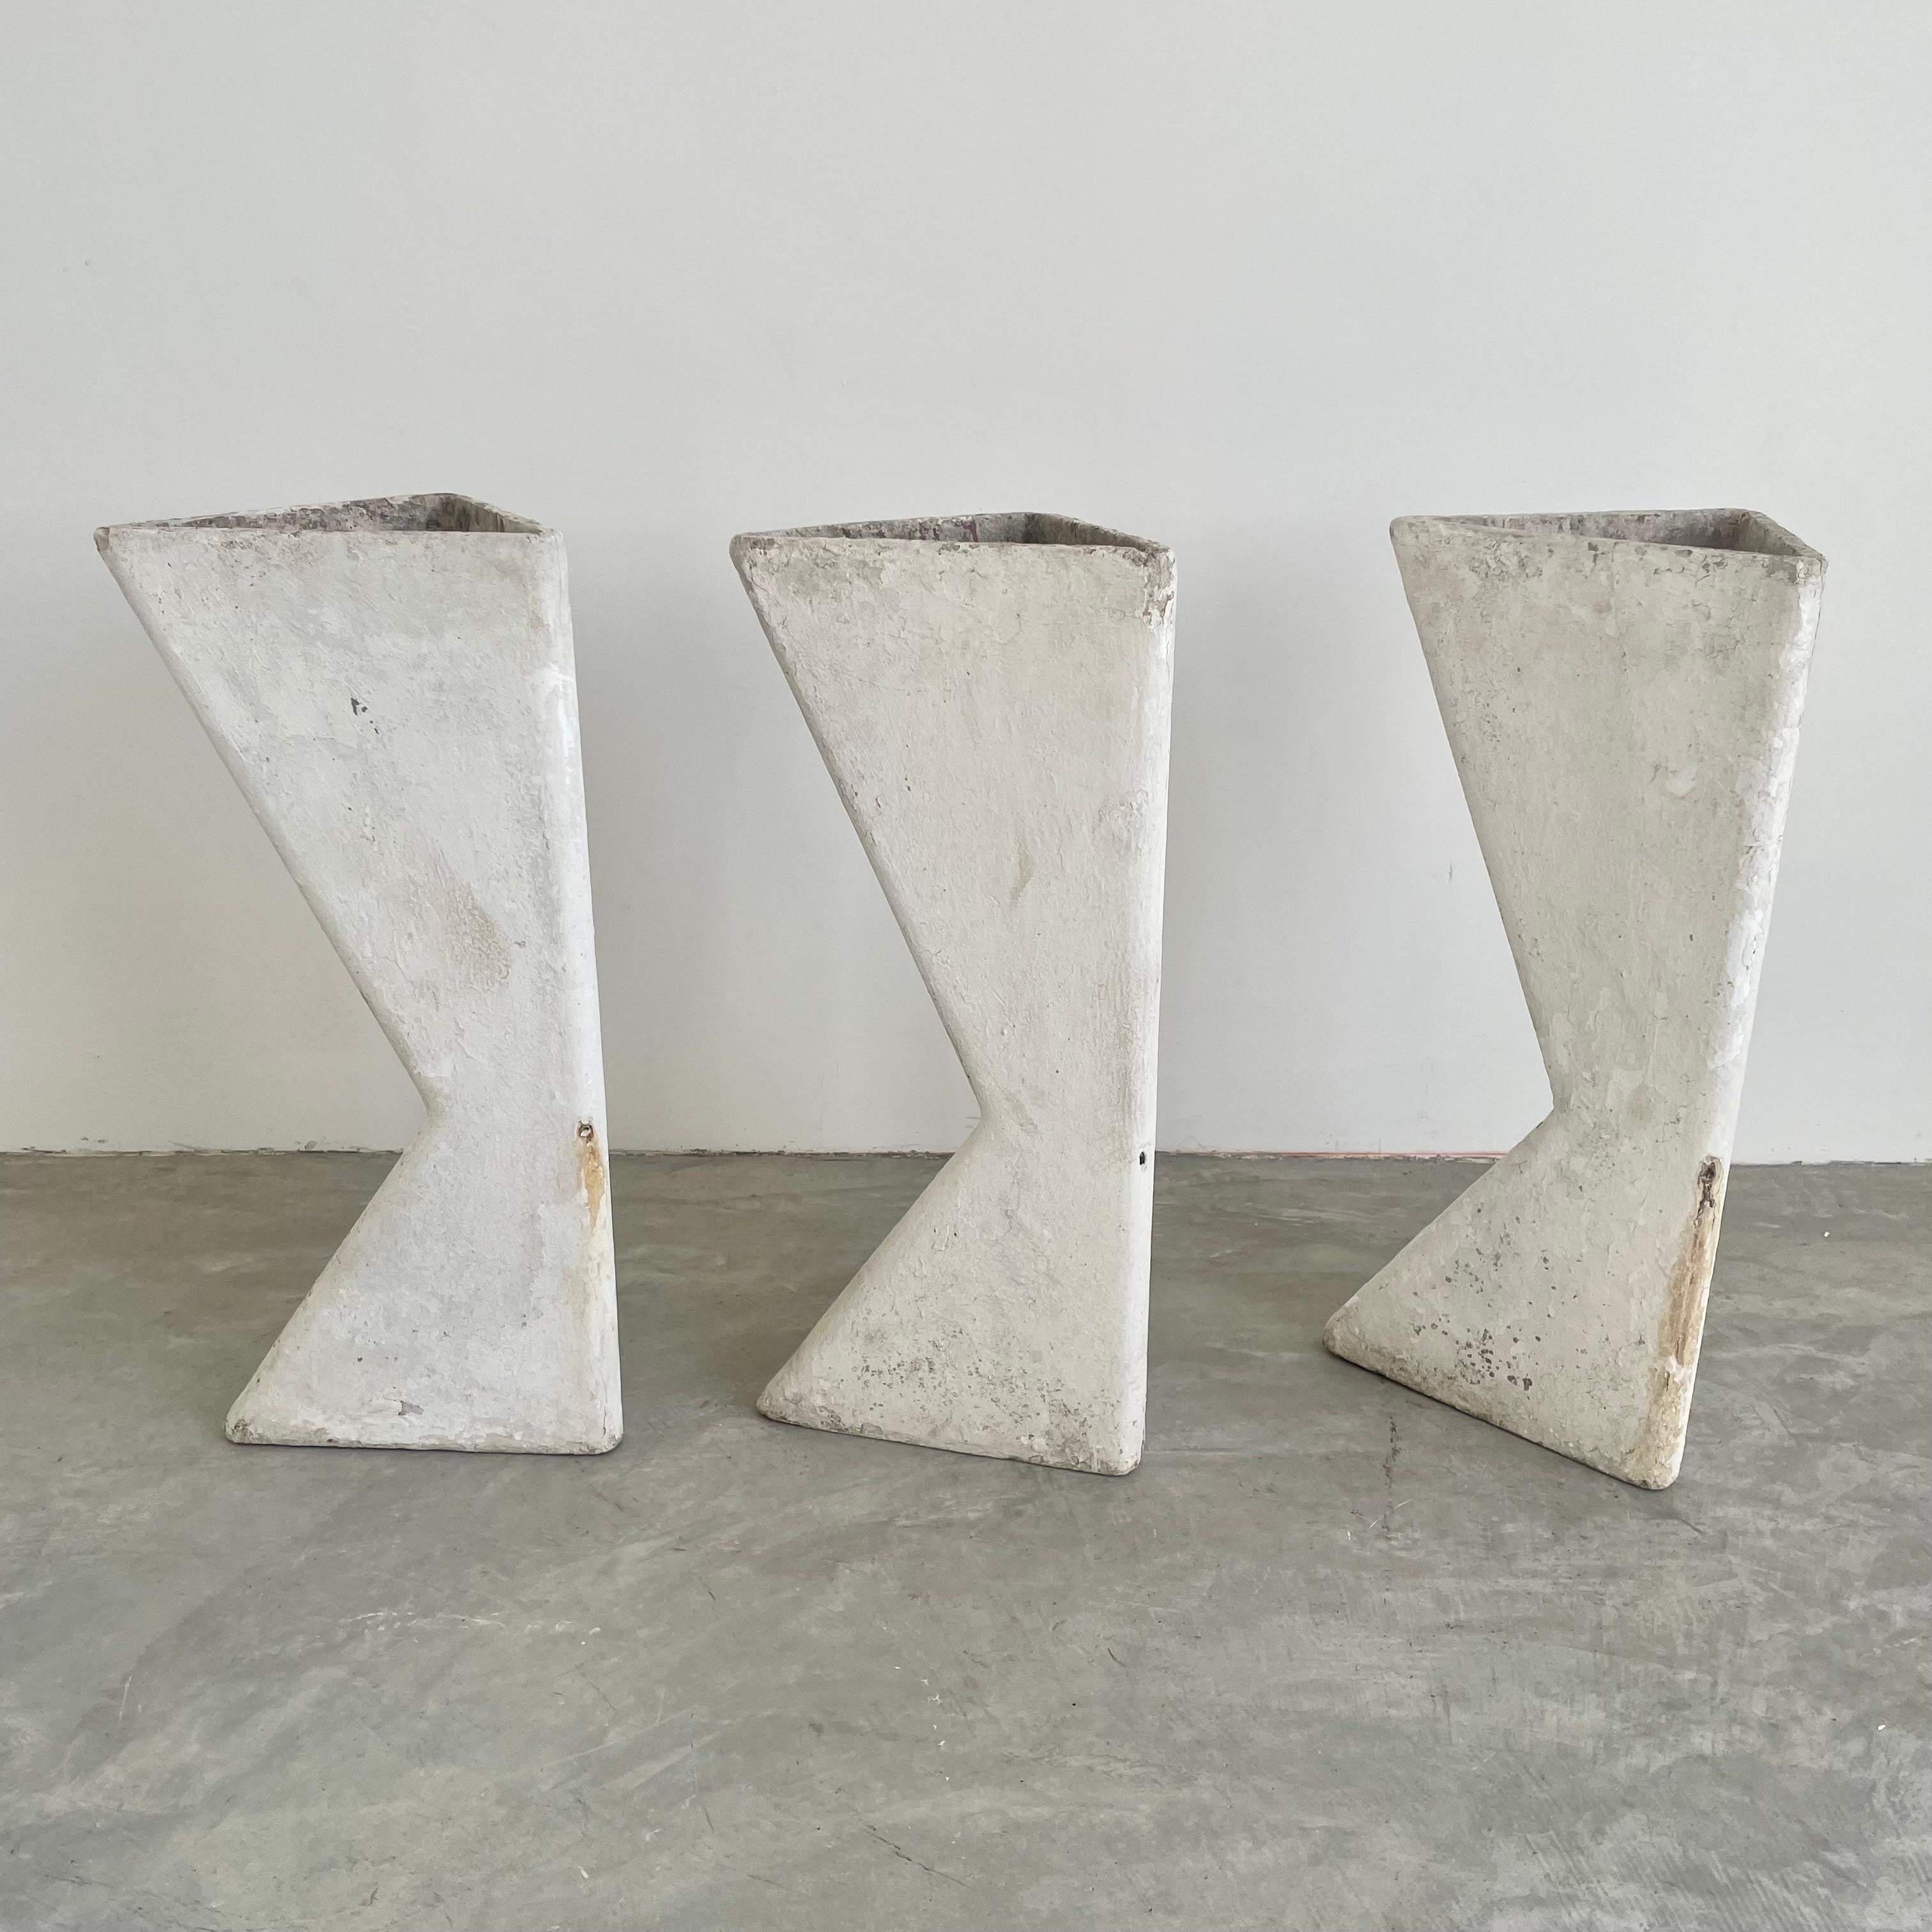 Set of 3 Sculptural Triangular Planters by Willy Guhl, 1960s For Sale 3